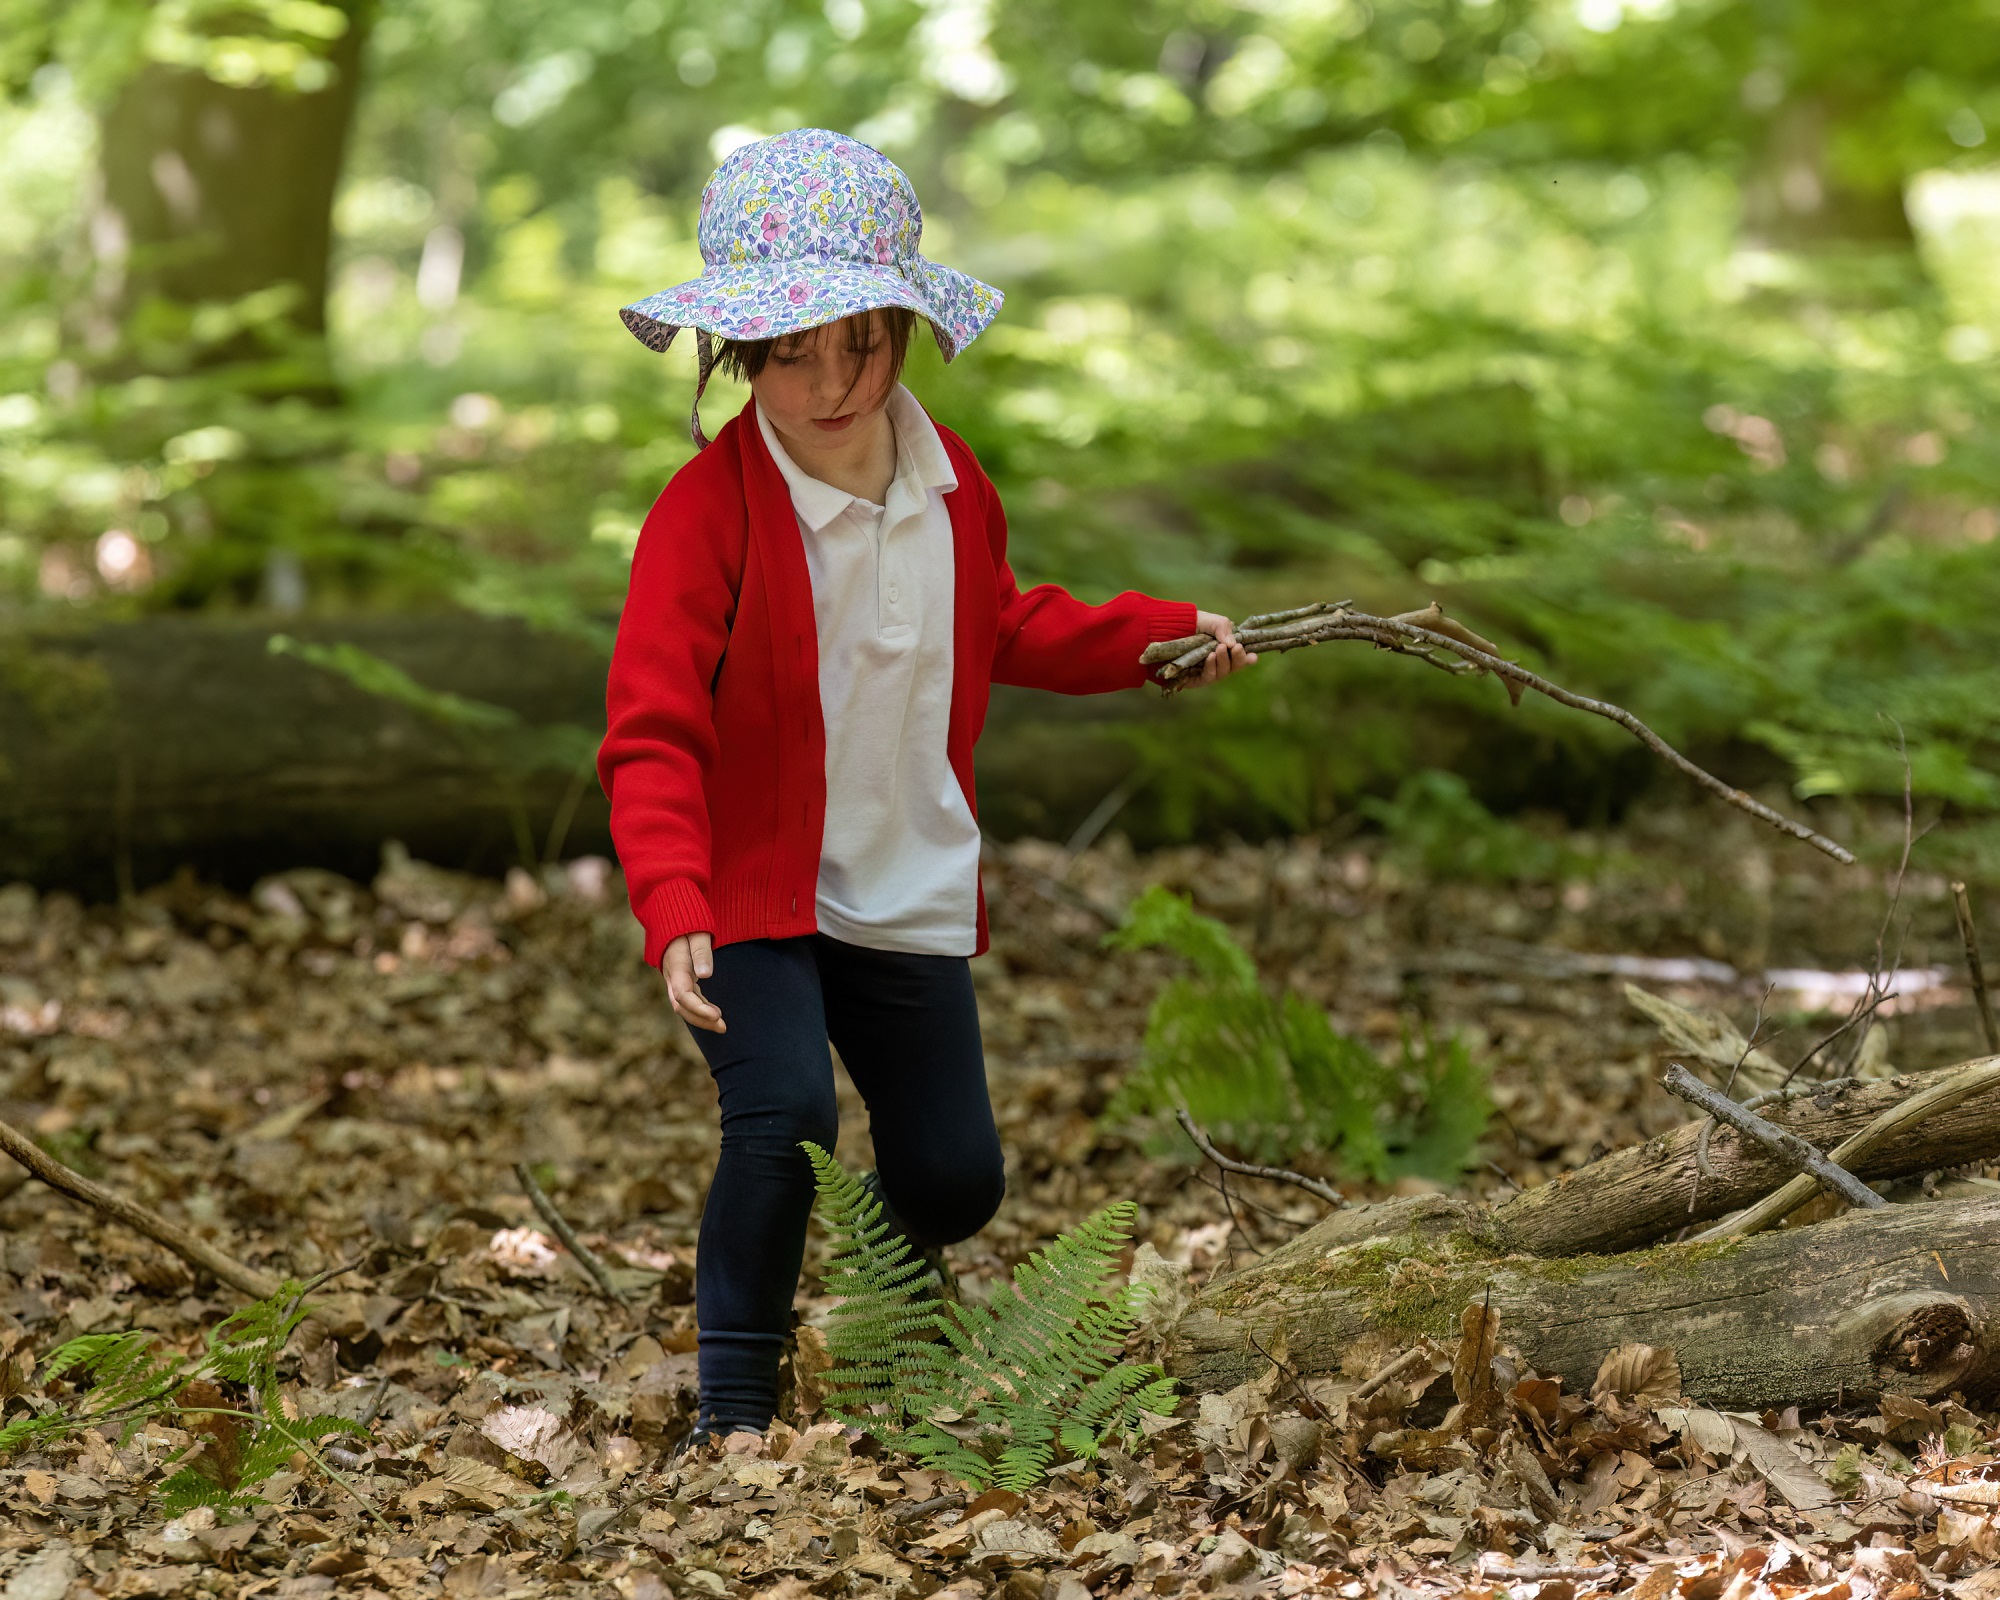 Young Child wearing a floral hat and red cardigan holding sticks.